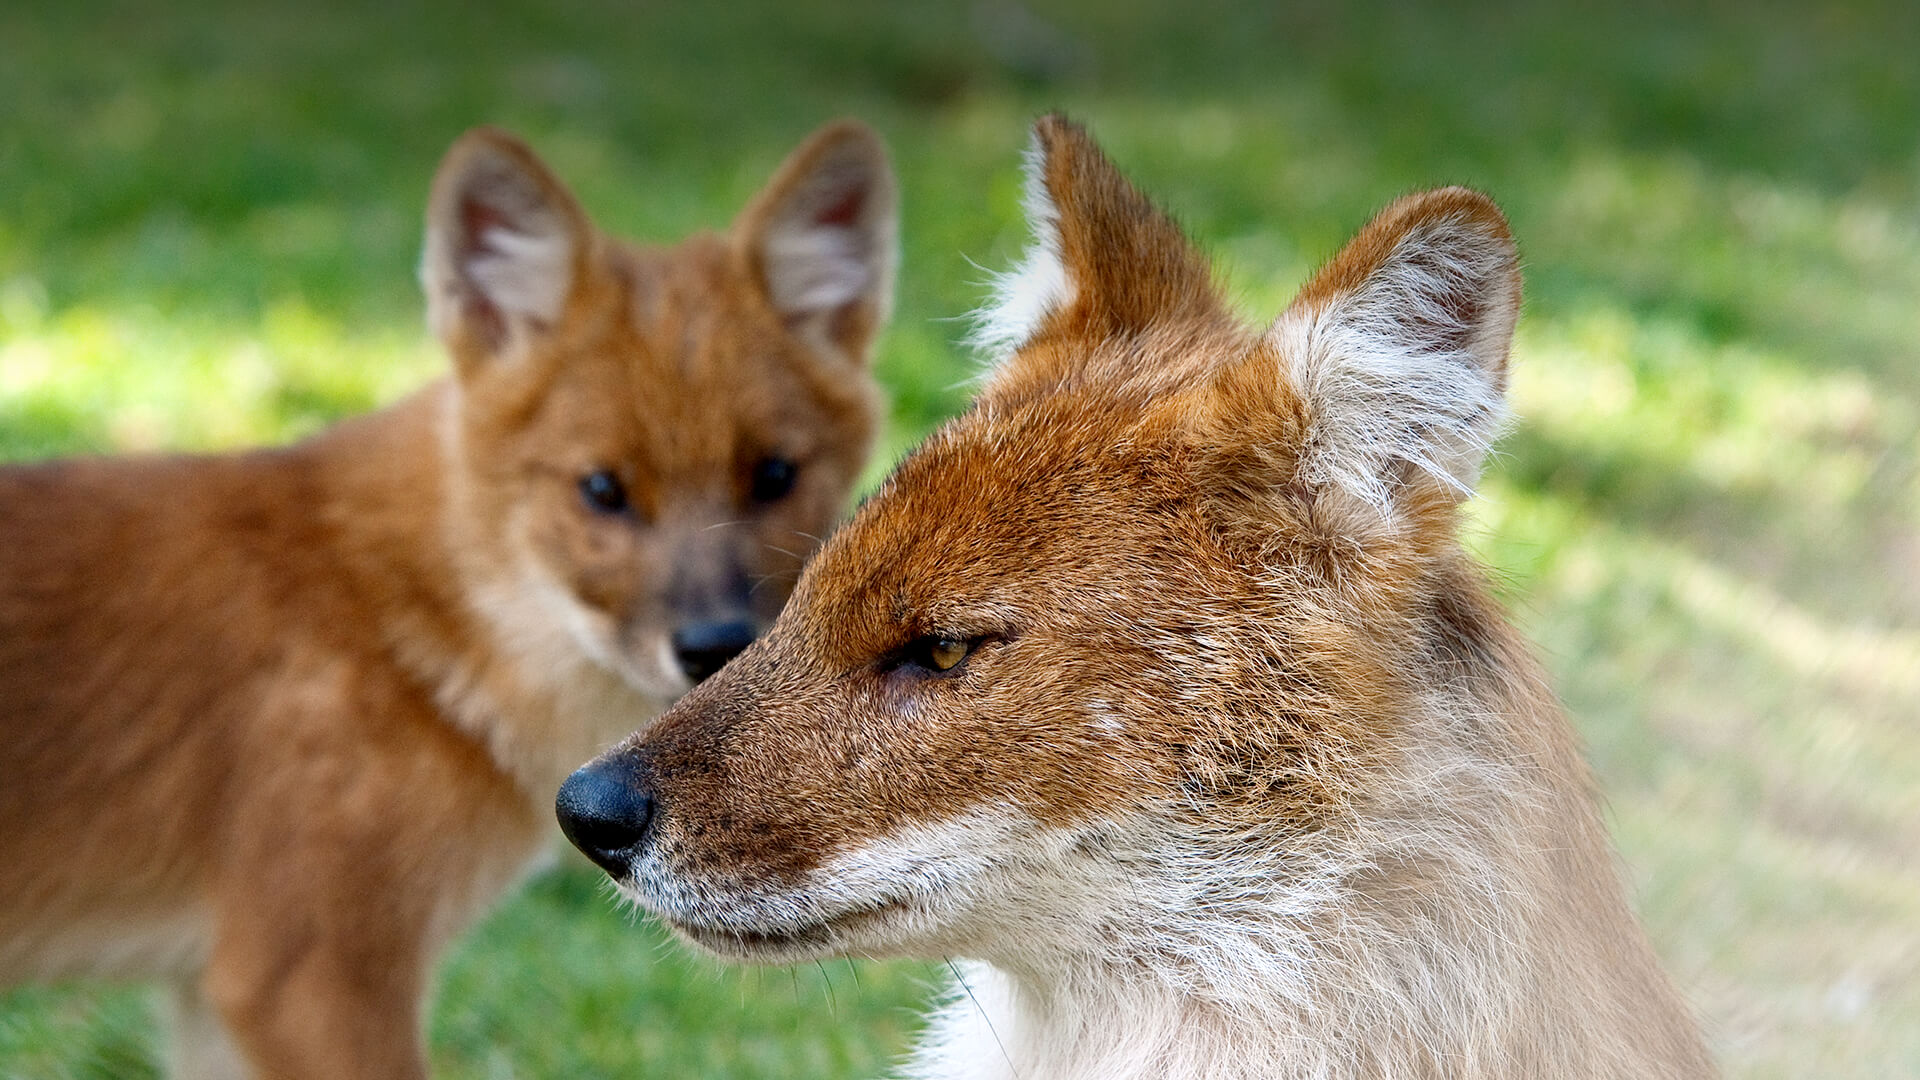 A female dhole looks straight left as one of her pups stands behind her